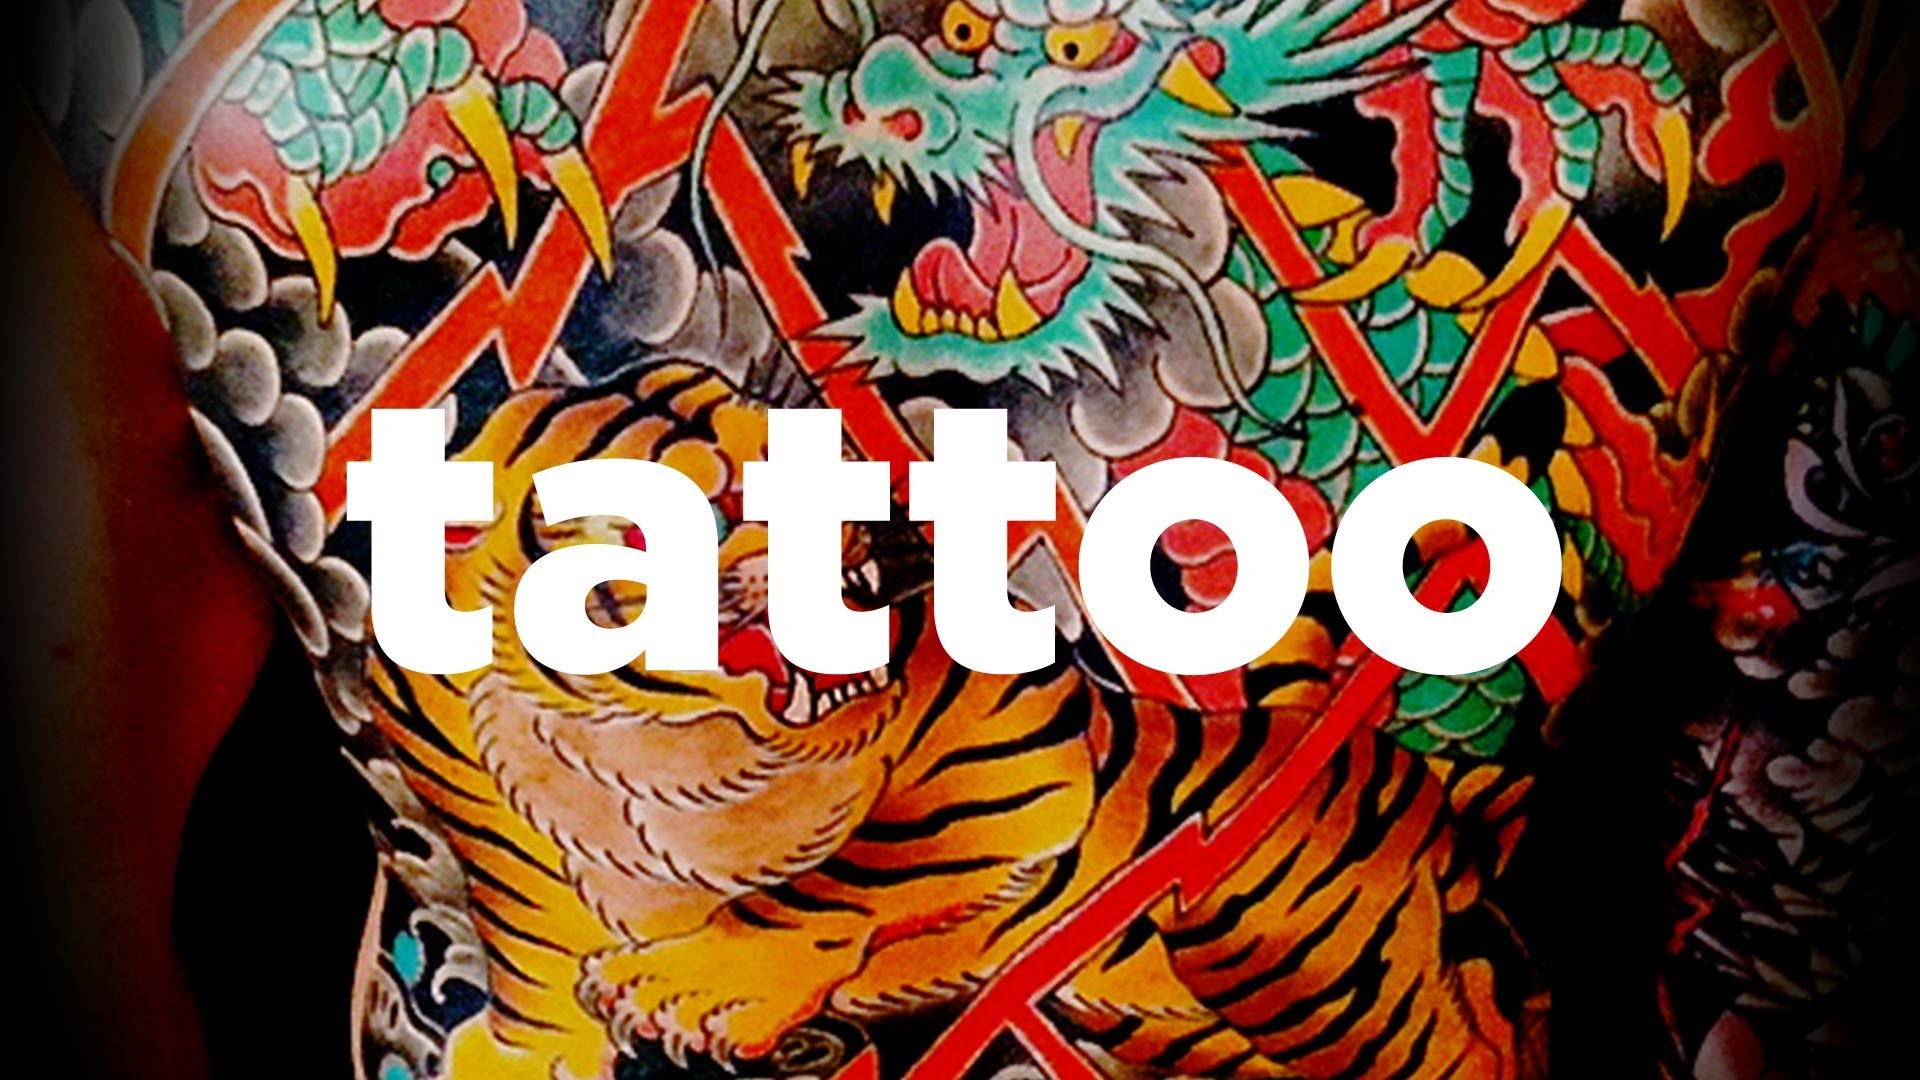 1920x1080 Tattoos: Pop Portraits, Japanese Traditional, American Eclectic | Off Book  | PBS Digital Studios - YouTube